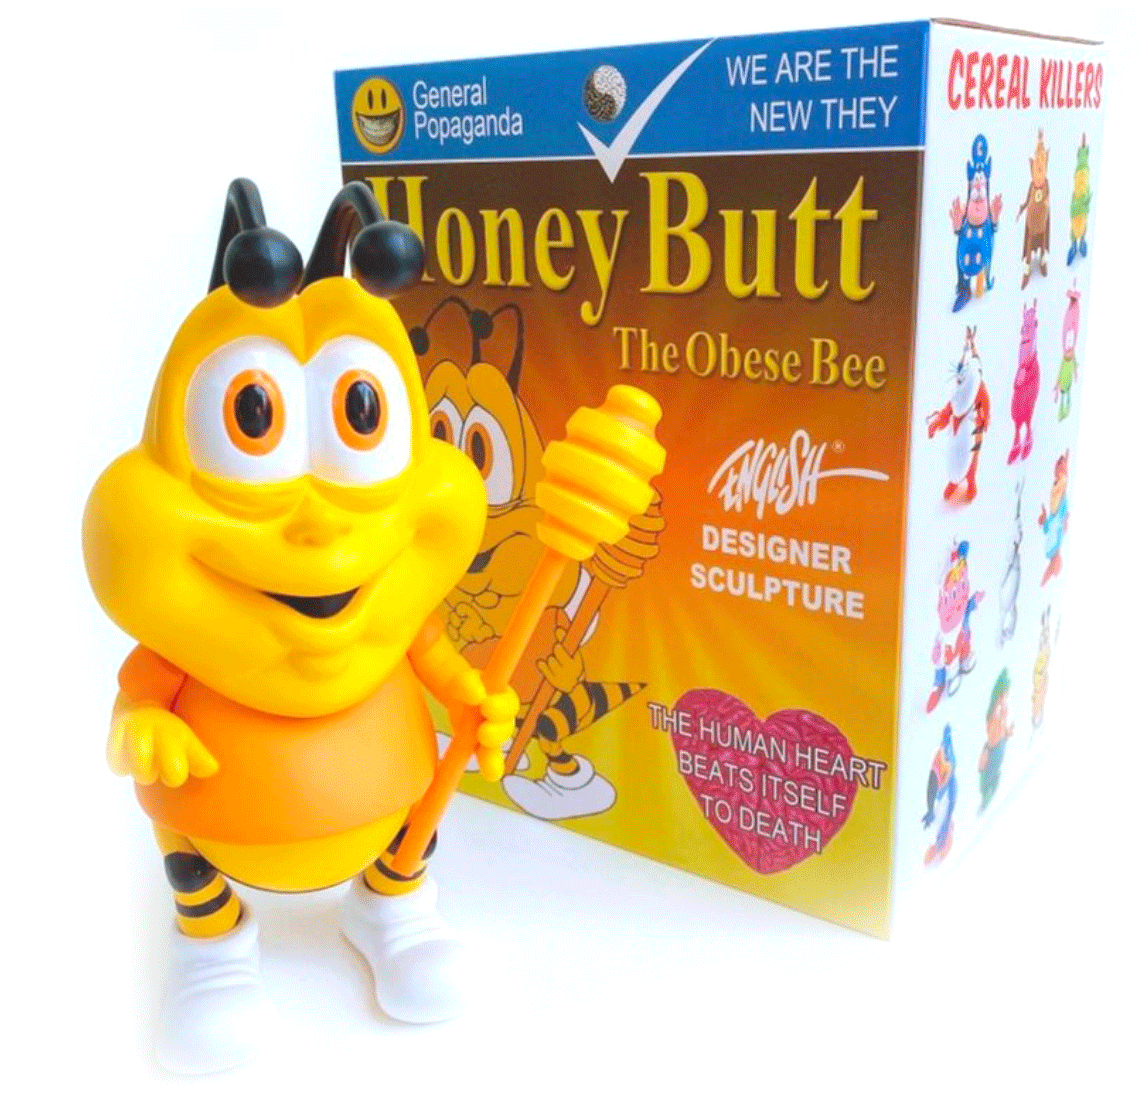 Honey Butt The Obese Bee by Ron English *Displayed